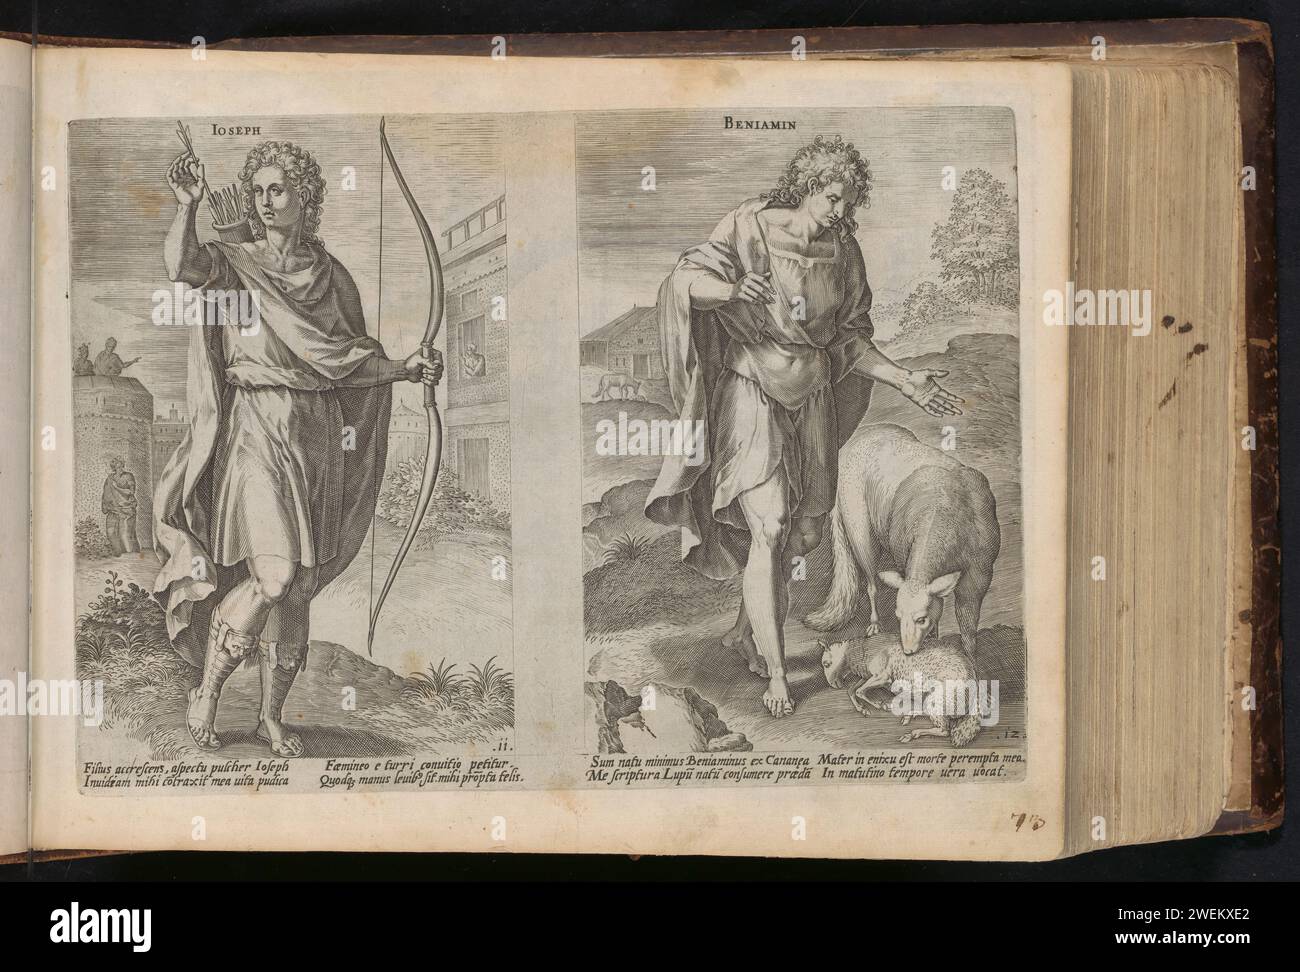 Ancestors Josef and Benjamin, 1646 print Left ancestor Jozef, the eleventh son of Jakob. Joseph has a bow and pulls an arrow out of a tube on his back. On the right ancestor Benjamin, the twelfth and last son of Jakob. In addition to Benjamin, a wolf devours a sheep, a reference to Benjamin as 'torn wolf'. Under the performances a reference in Latin to the Bible text. This print is part of an album.  paper engraving . Stock Photo